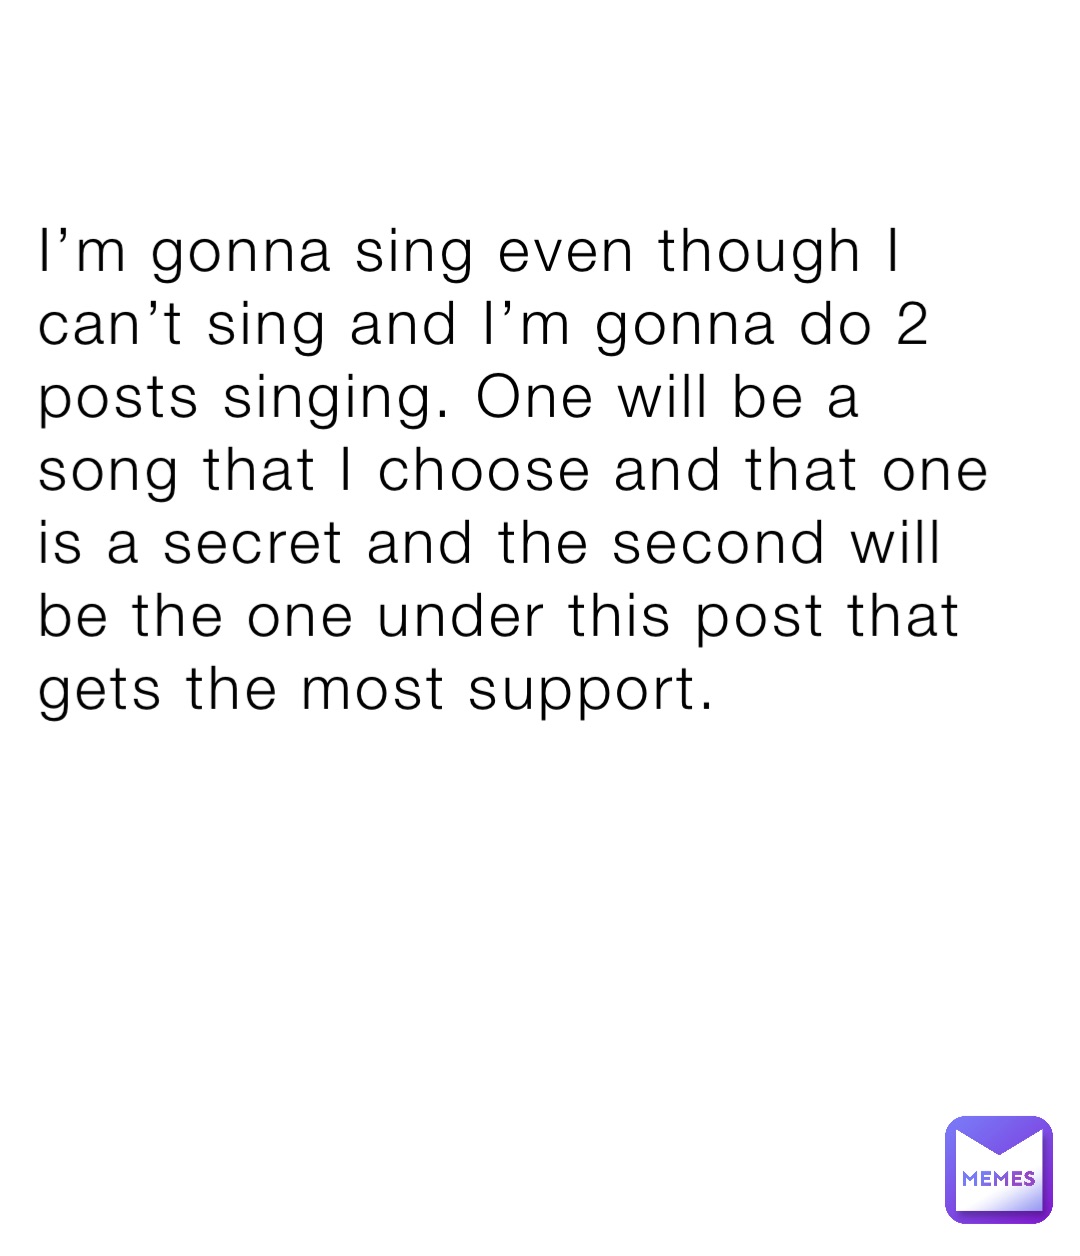 I’m gonna sing even though I can’t sing and I’m gonna do 2 posts singing. One will be a song that I choose and that one is a secret and the second will be the one under this post that gets the most support.